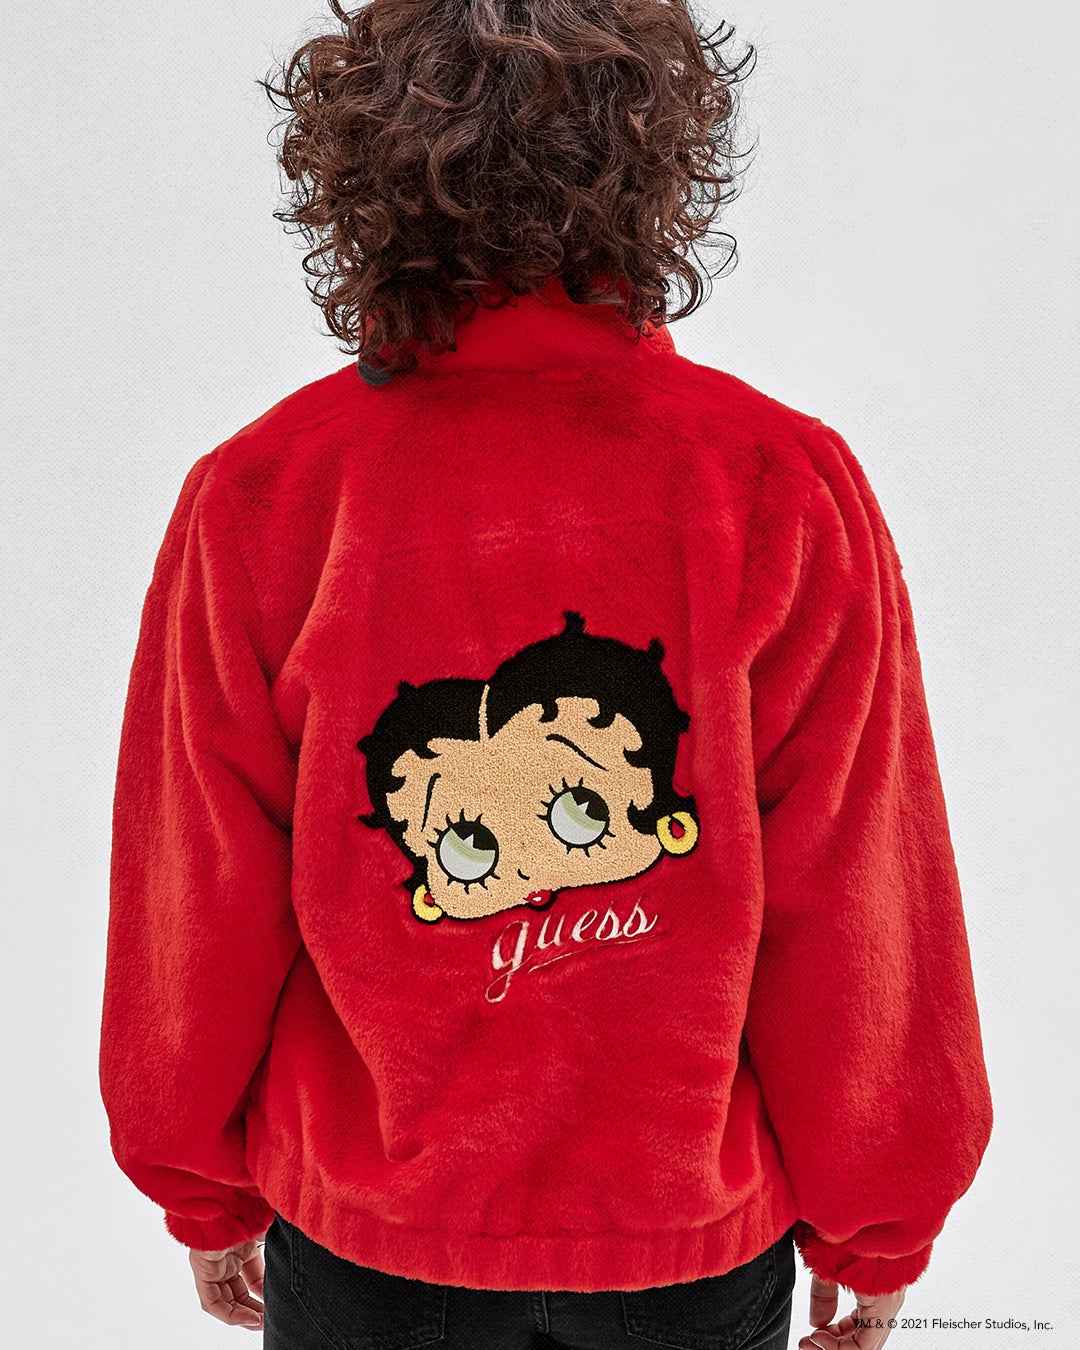 A jacket with an image of Betty Boop on the back